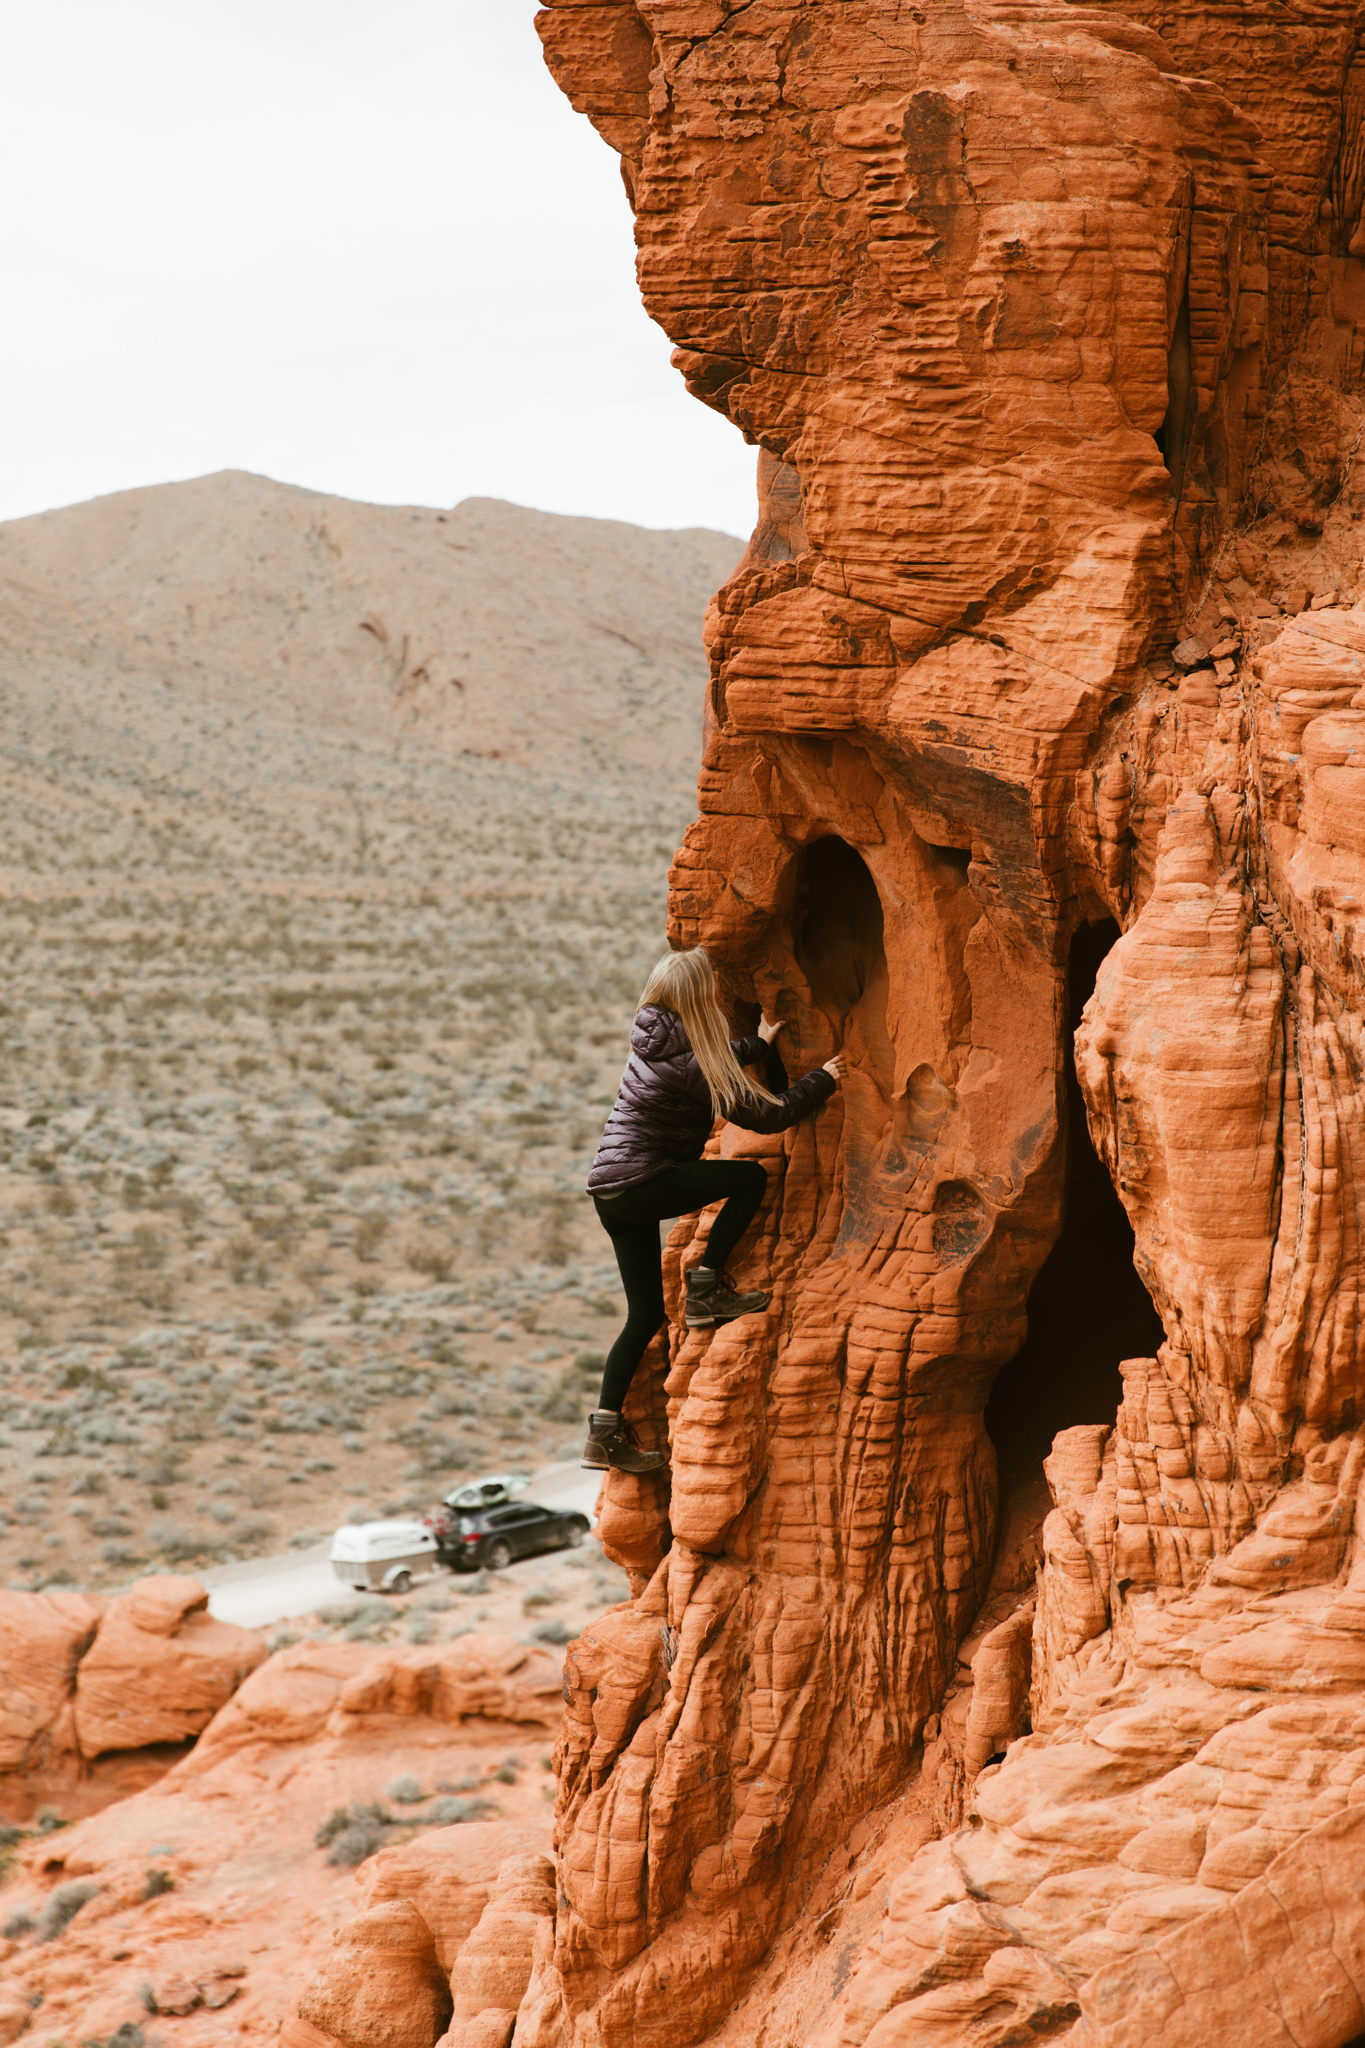 valley of fire state park | utah and california adventure elopement photographers | the hearnes adventure photography | www.thehearnes.com